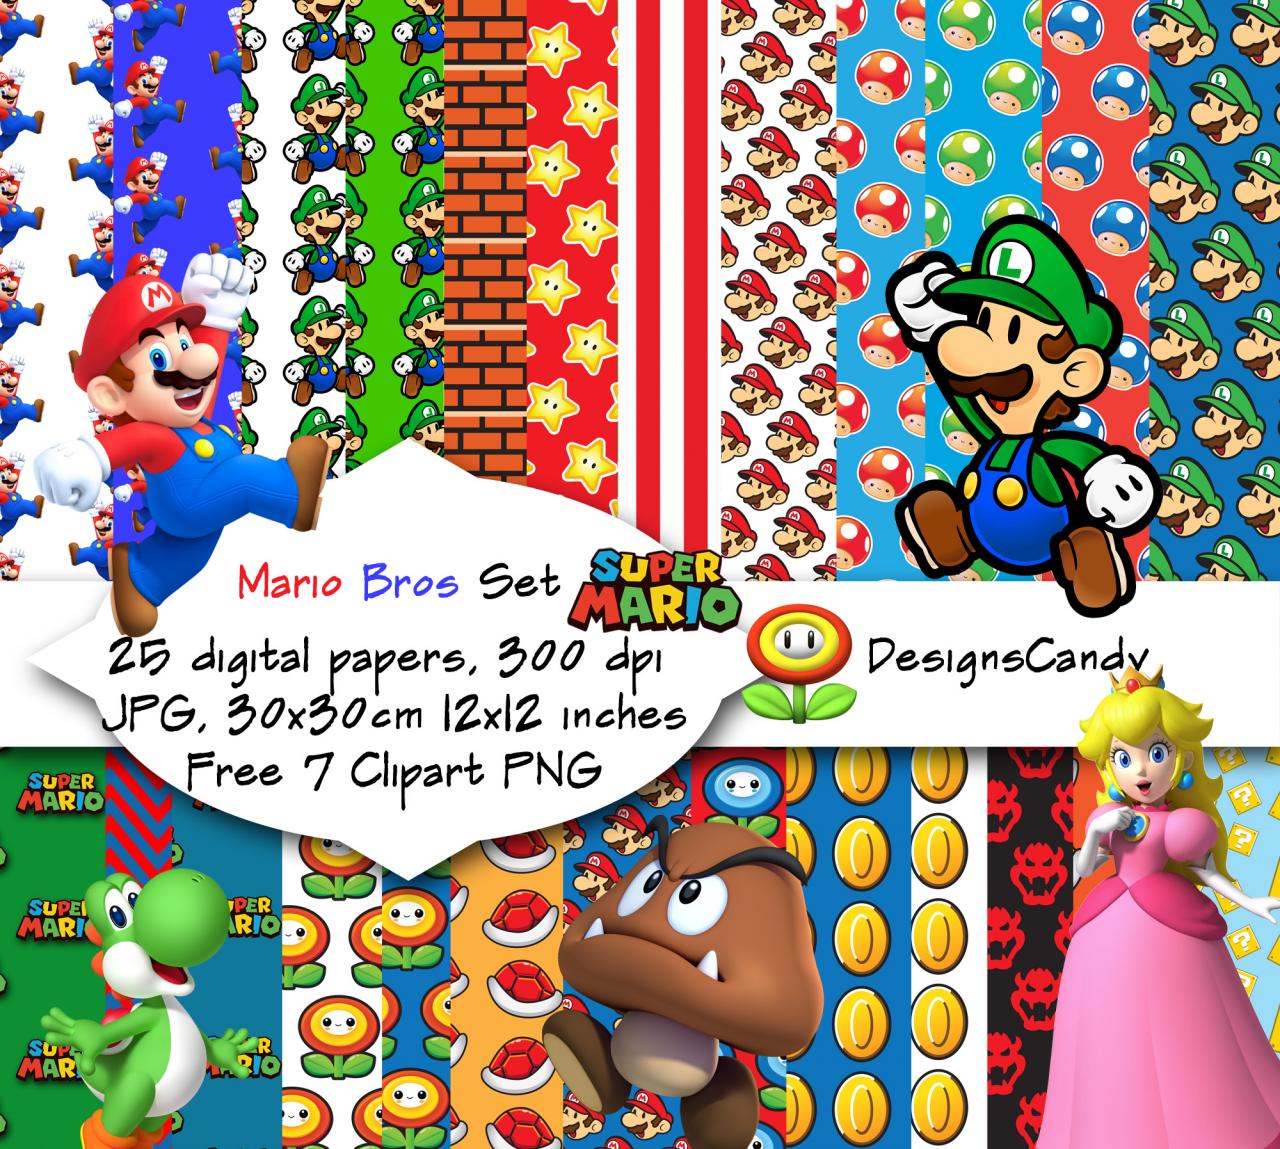 Mario Bros Inspired Digital Paper Pack , 12x12, 25 Papers, Jpg, Scrapbook, Clipart , Digital Paper, Birthday Party, Invitation P&c Use